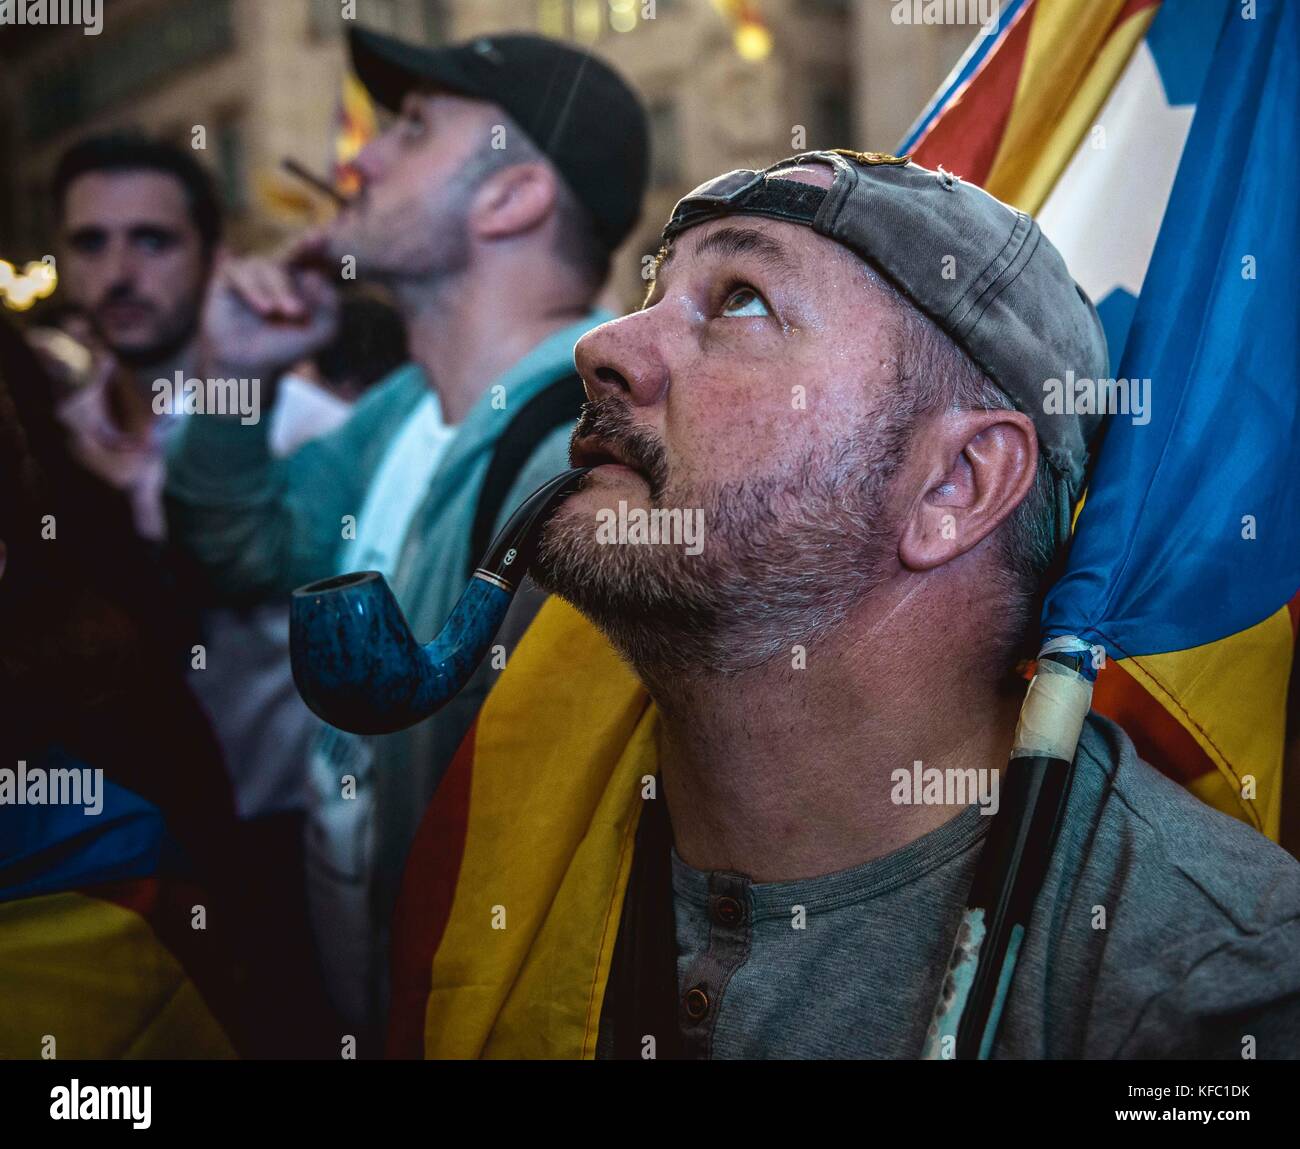 Barcelona, Spain. 27 October, 2017:  A Catalan separatist smokes his pipe as he celebrates the parliaments independence vote in front of the 'Generalitat' Credit: Matthias Oesterle/Alamy Live News Stock Photo